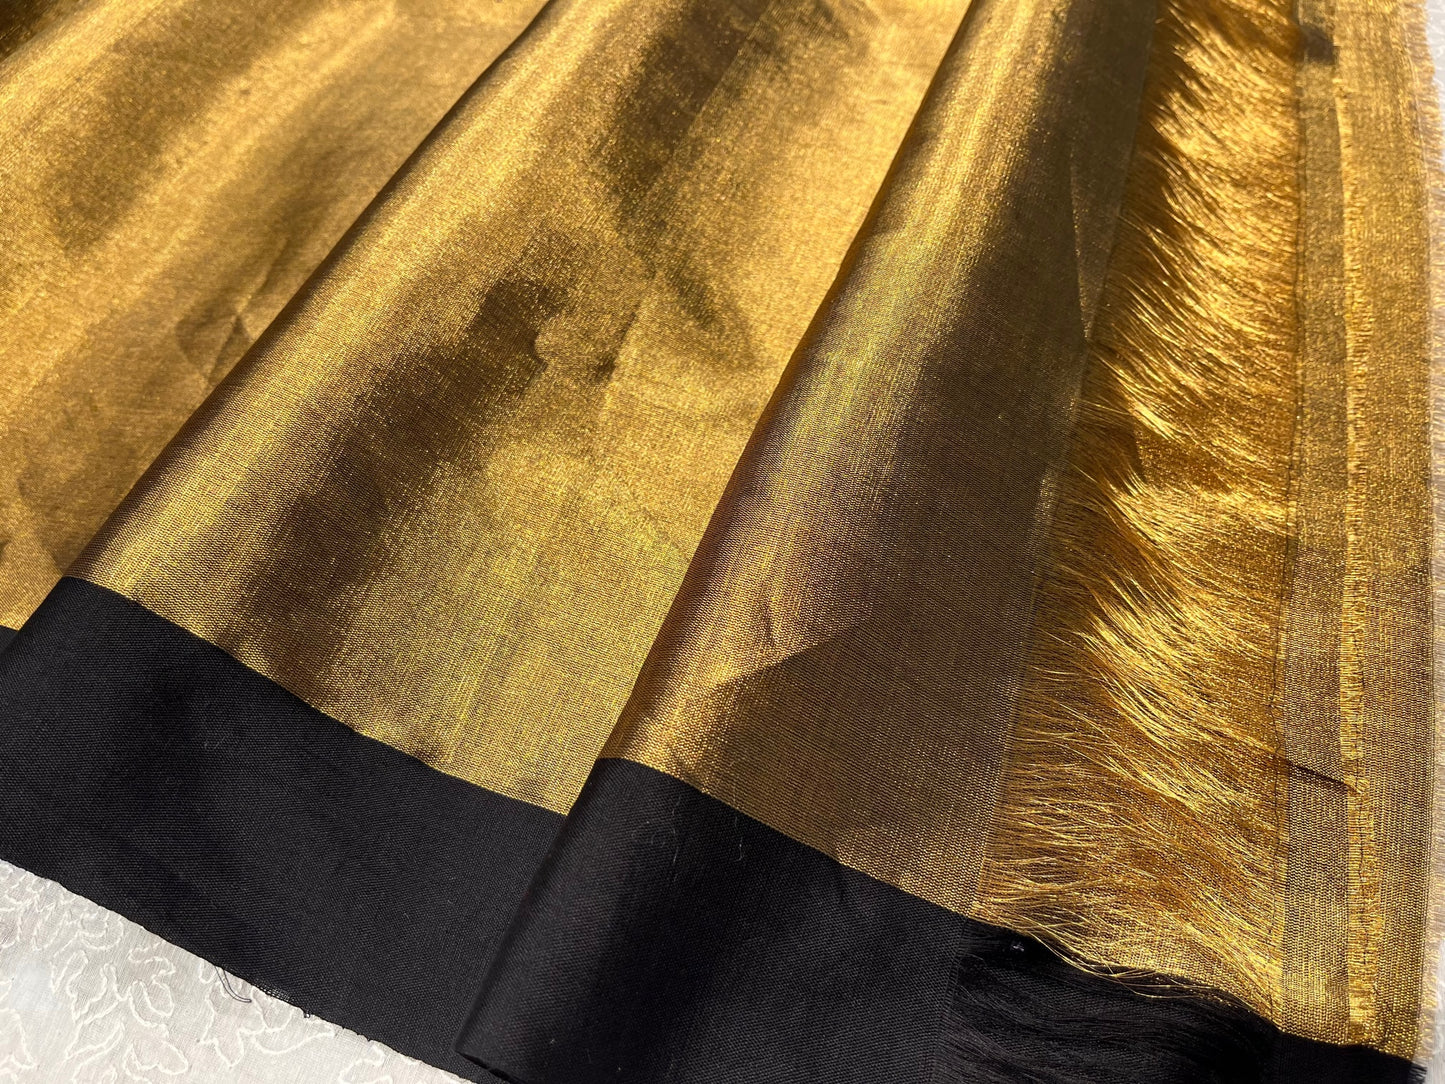 ( DELIVERY IN 25 DAYS ) GOLDEN COLOUR PURE CHANDERI TISSUE HANDLOOM SAREE EMBELLISHED WITH BLACK BORDER WITHOUT BLOUSE